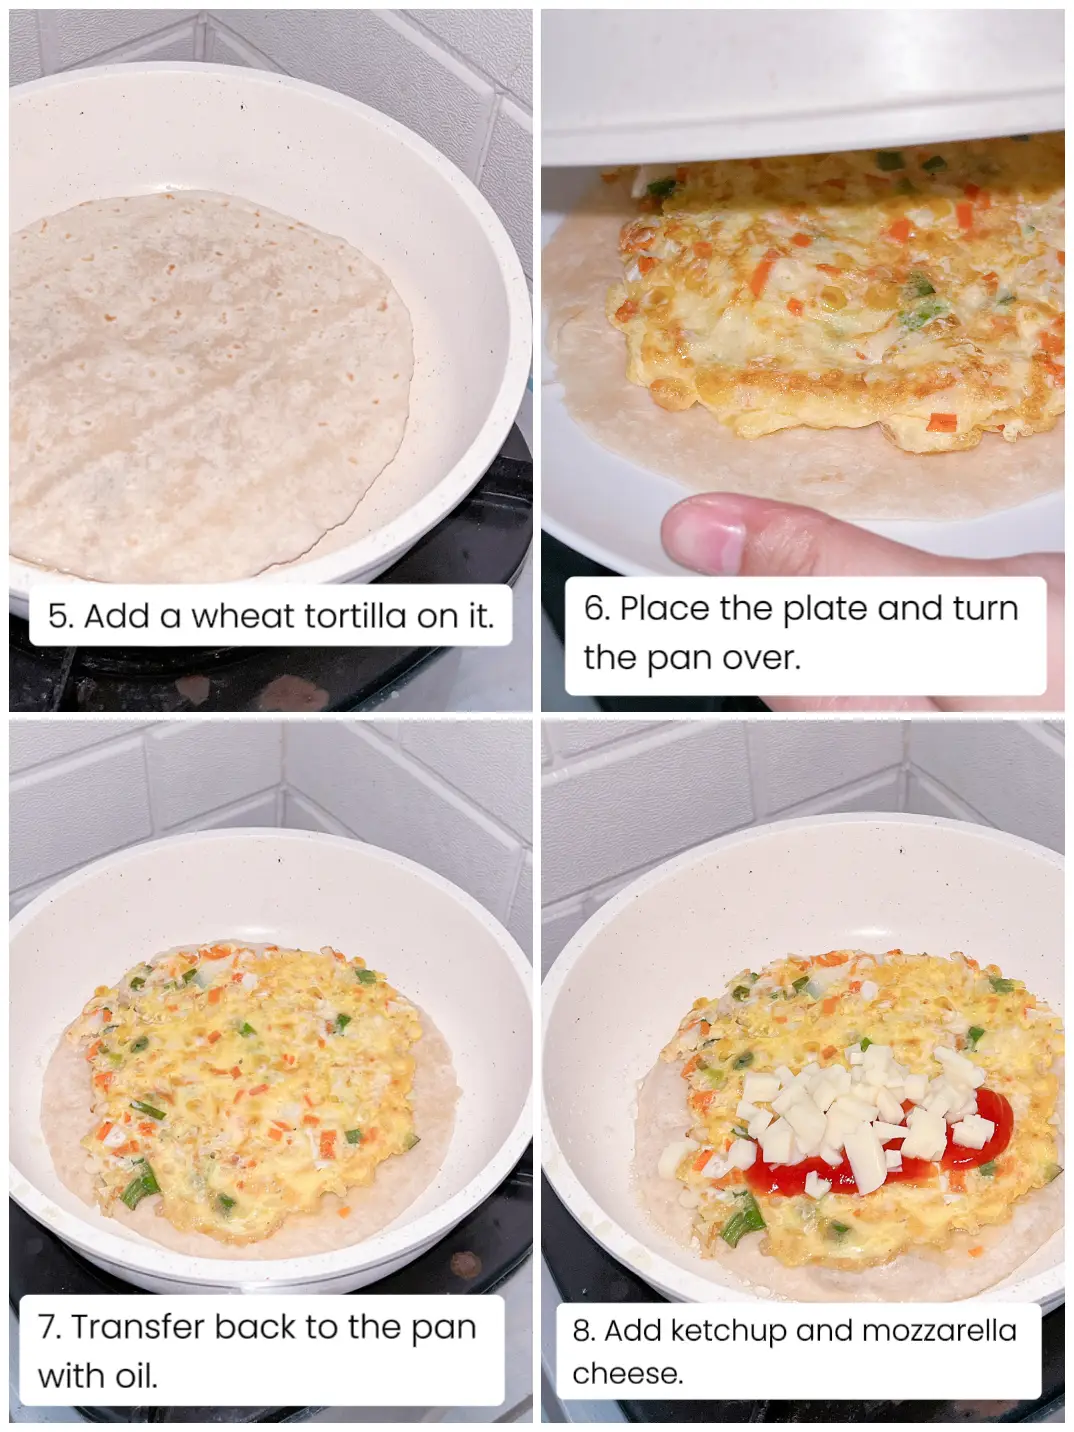 How To Make The Viral Egg Tortilla Wrap Recipe - Chop Happy